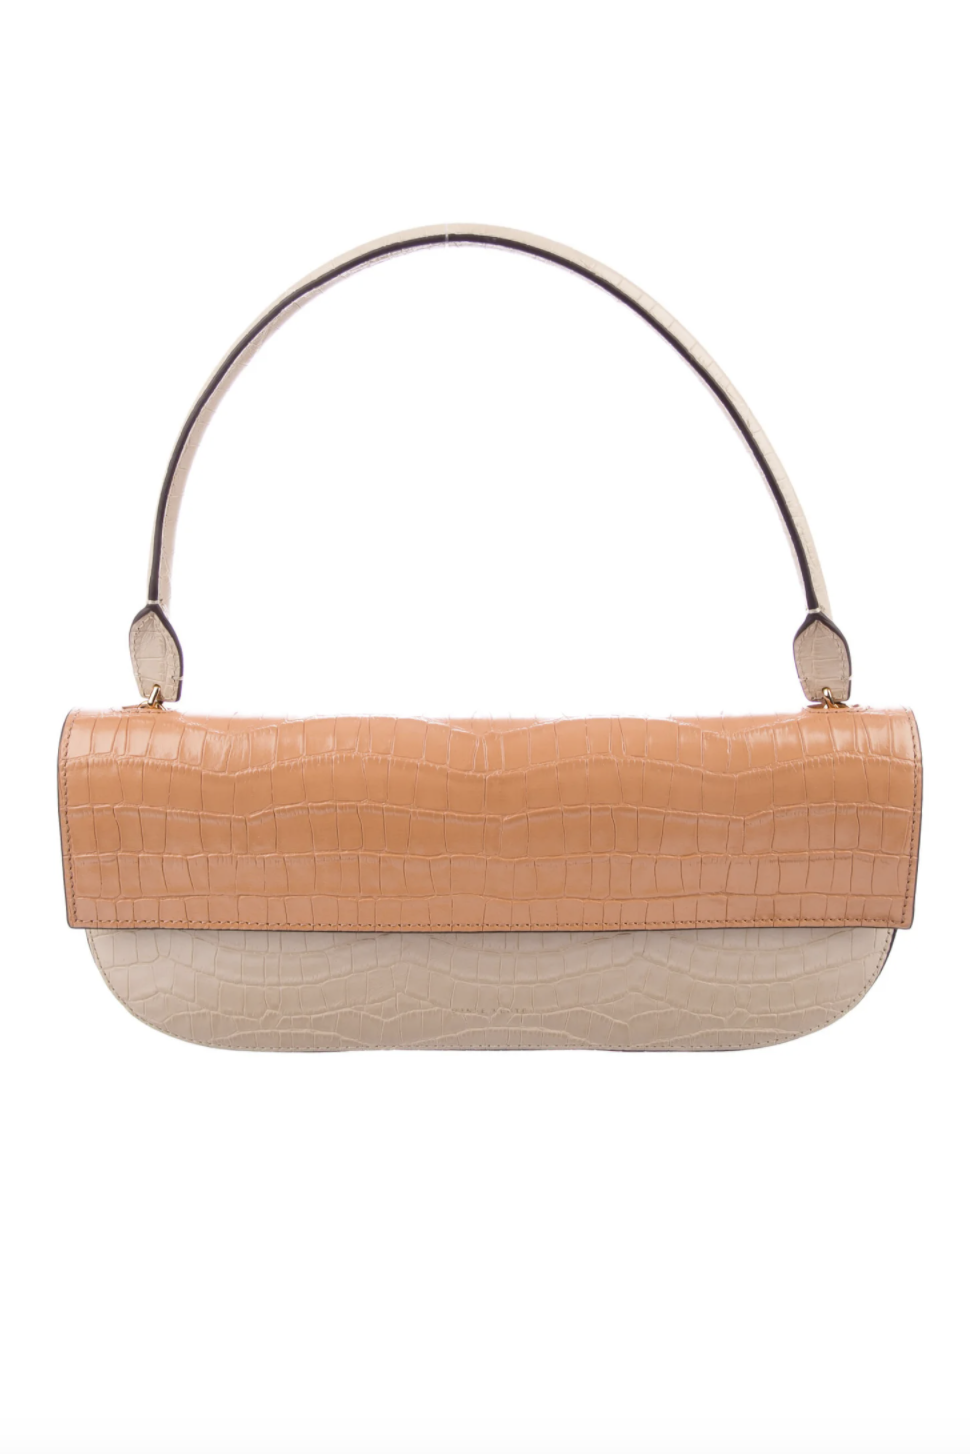 The Perfect Baguette Bag - Full Leather Collection - Bone